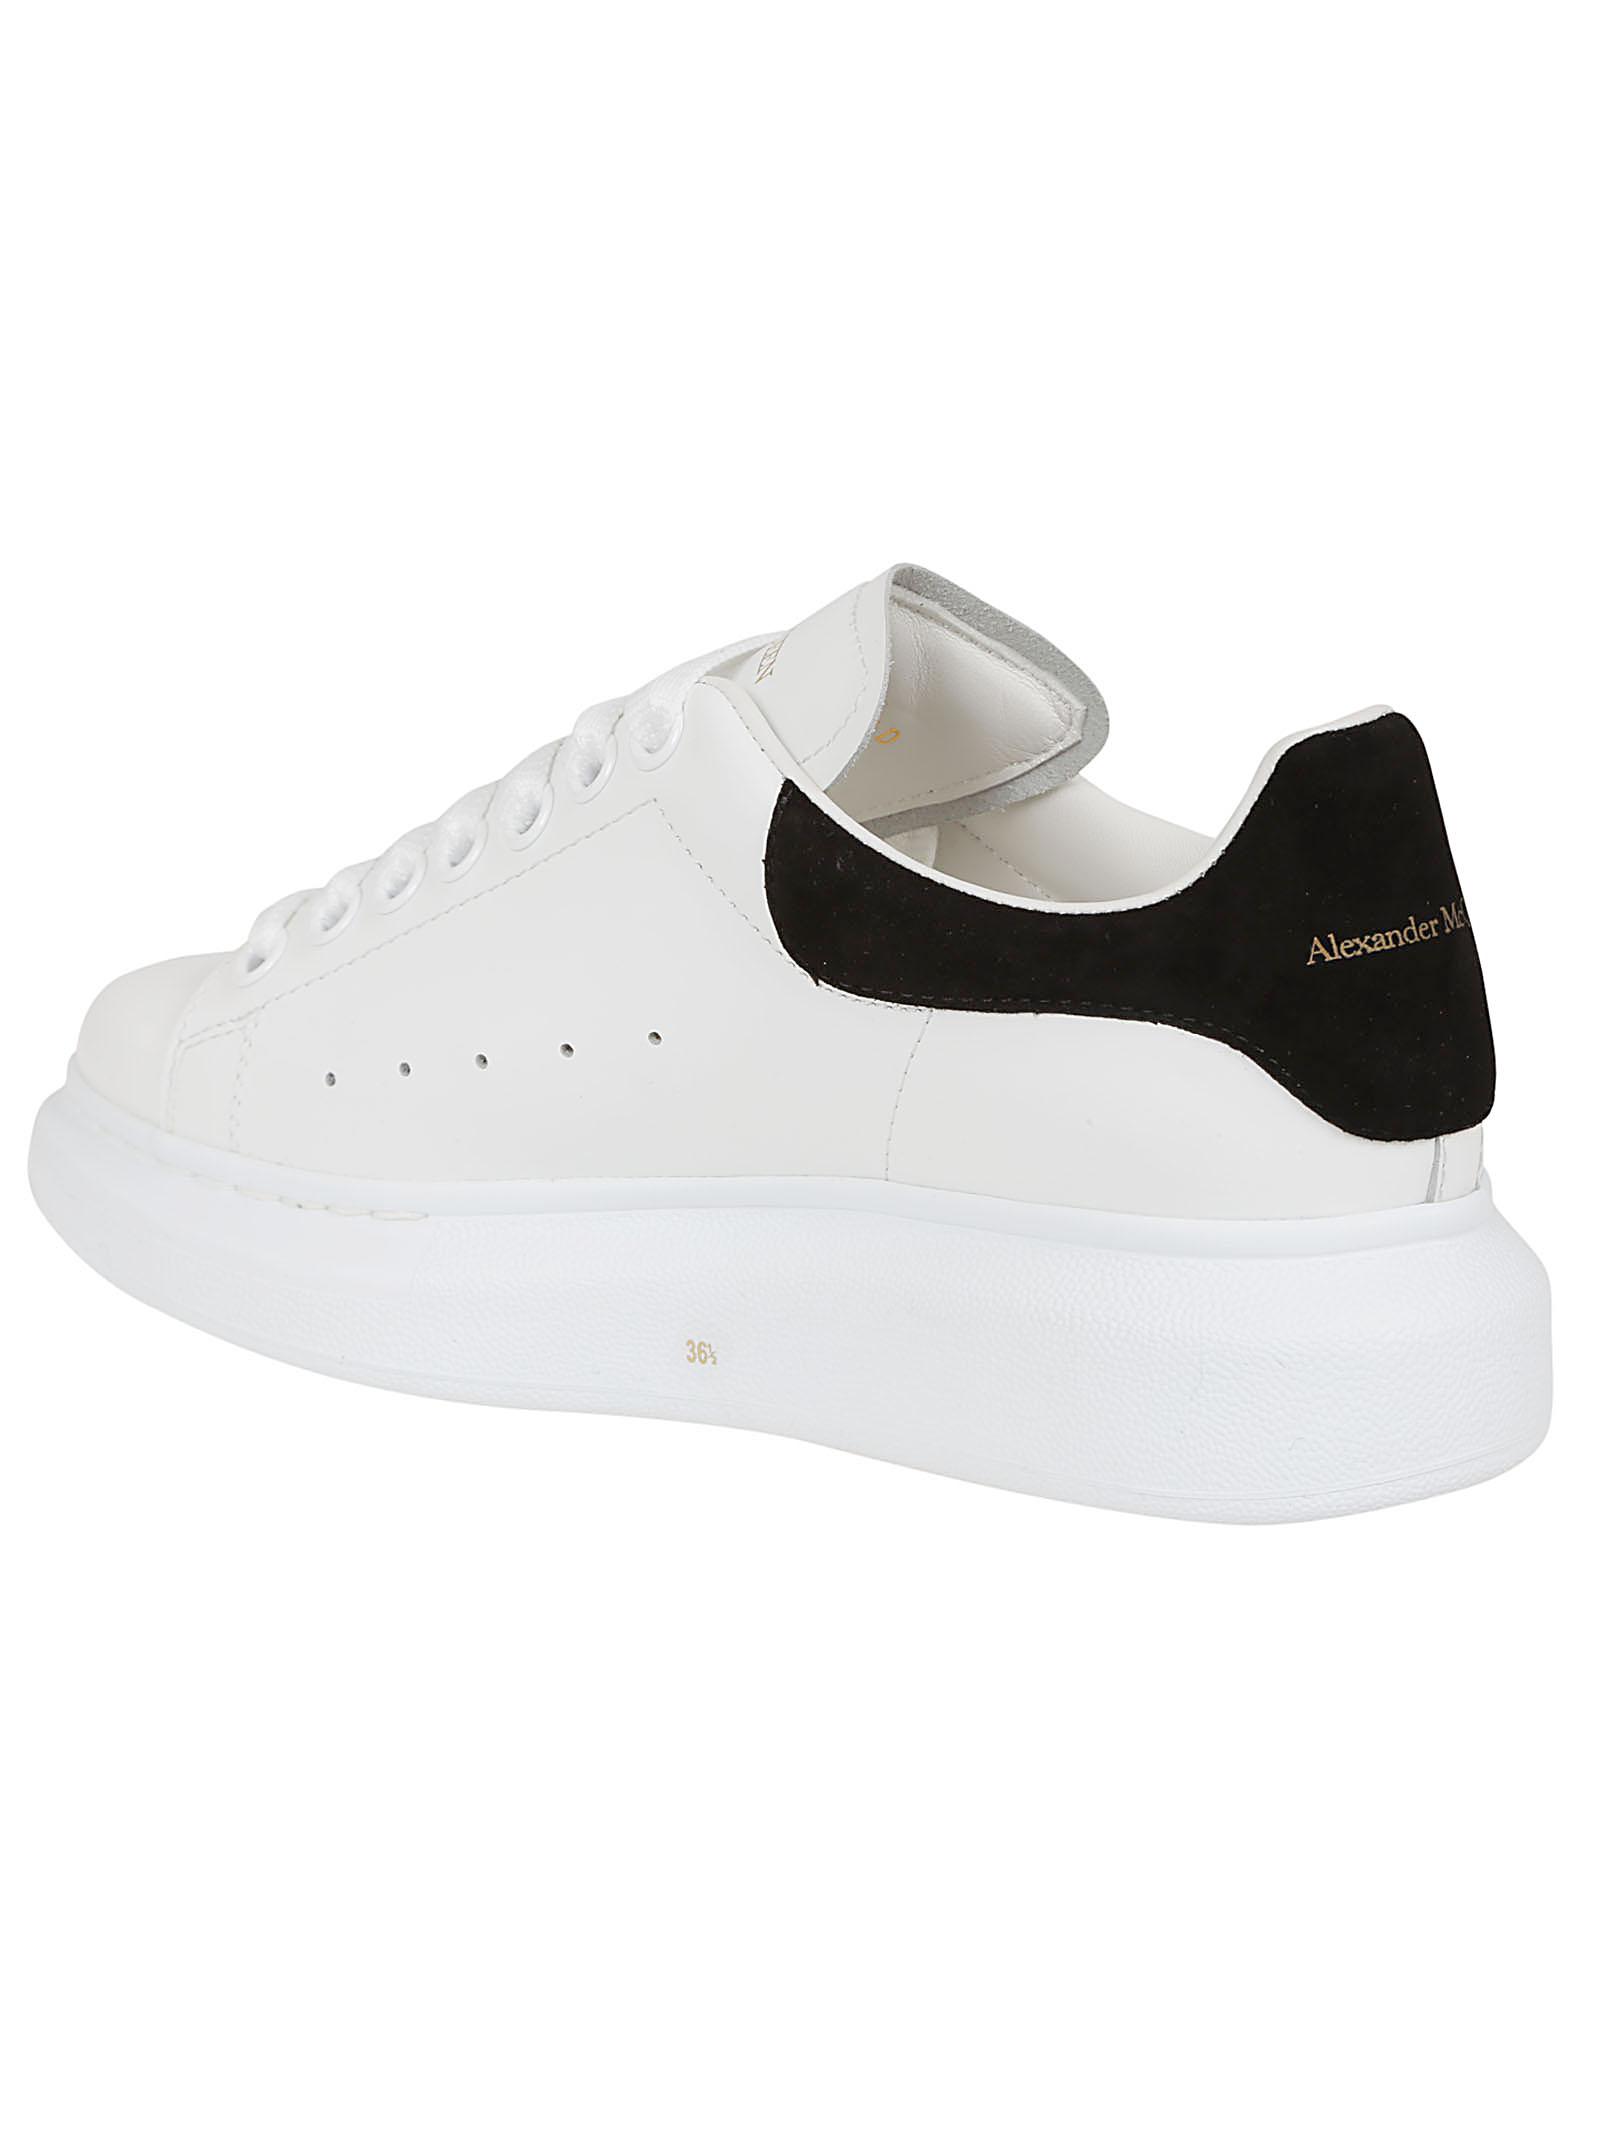 Alexander McQueen Suede-trimmed Leather Exaggerated-sole Sneakers in ...